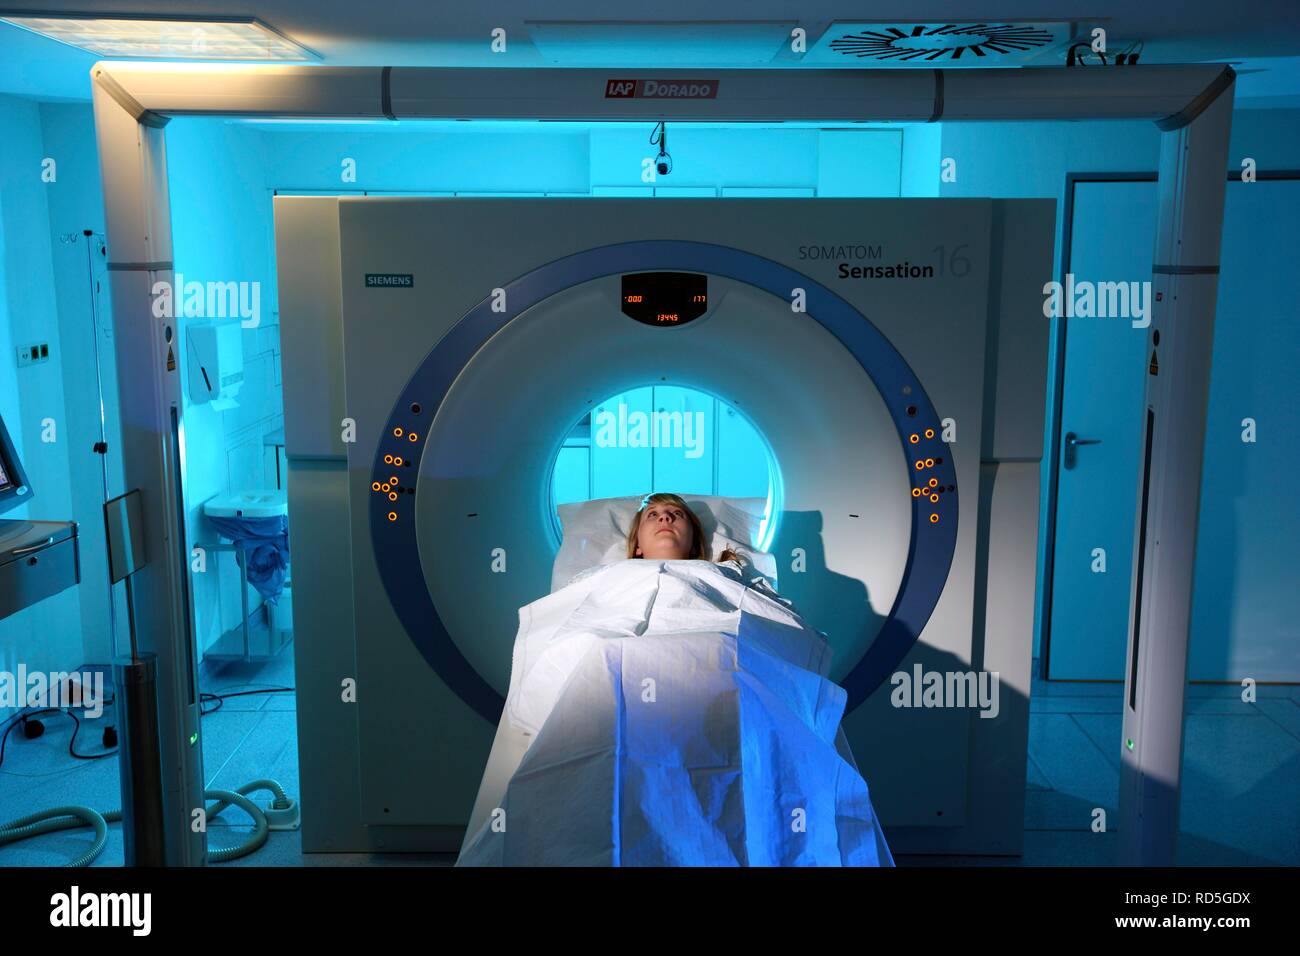 Computer tomography, CT or cat-scan, computer-assisted tomography, hospital Stock Photo